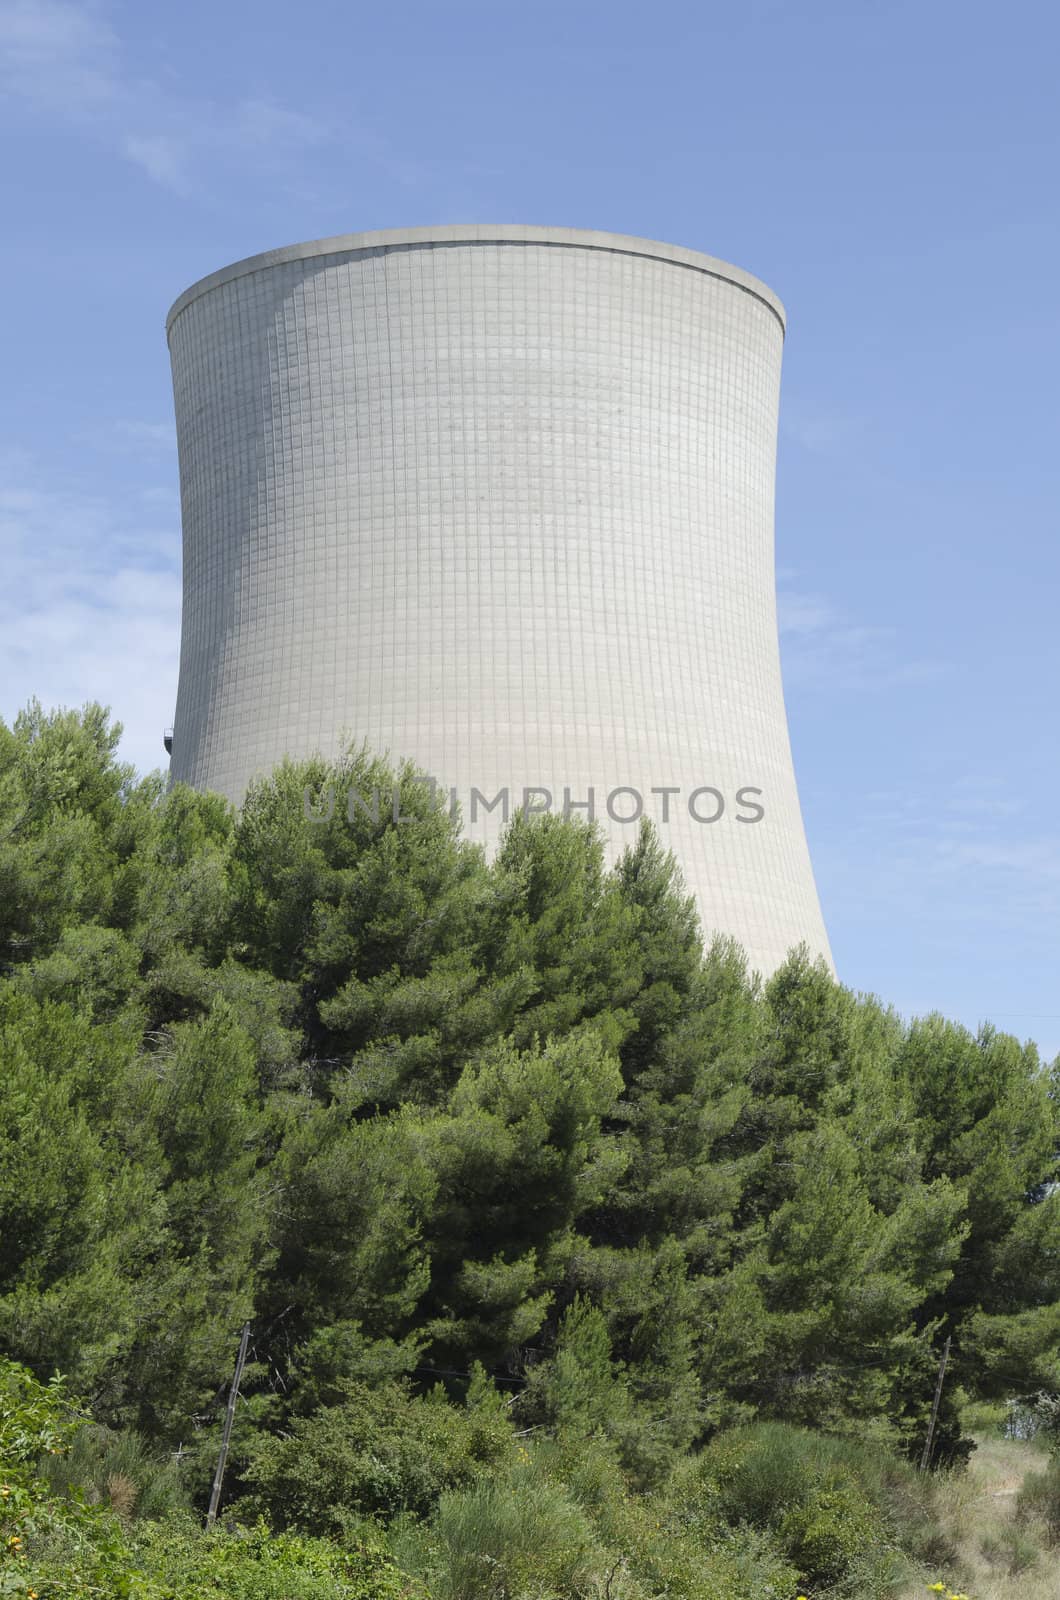 cooling tower nuclear in campaign behind trees